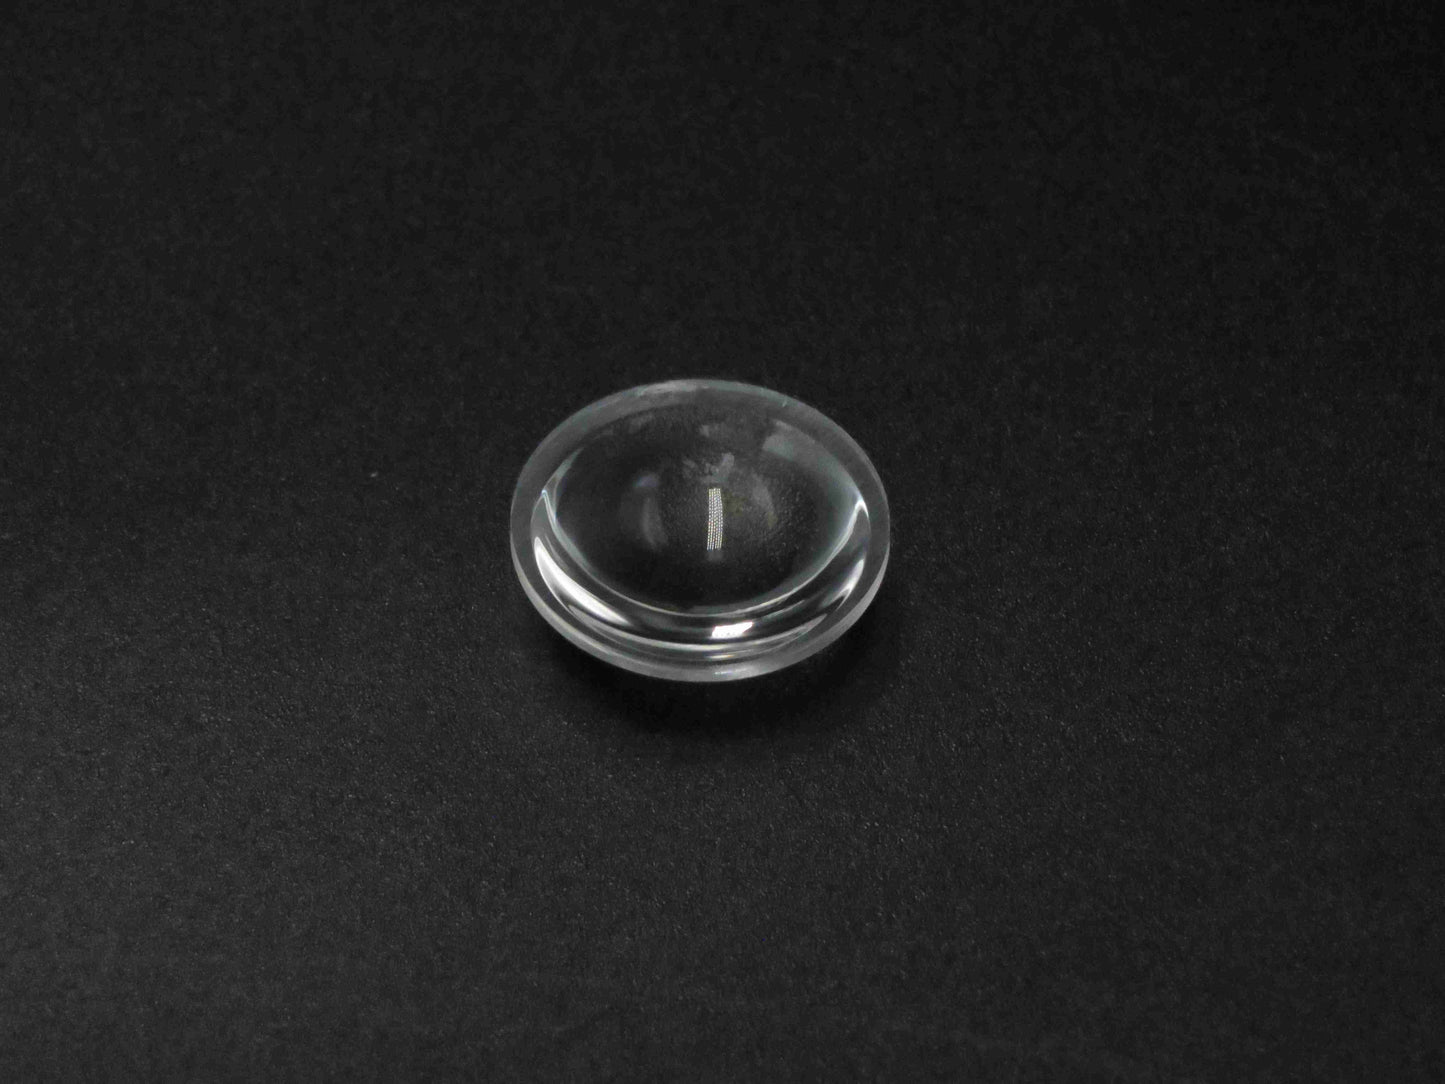 21.5mm led lenses for projector light concentrating projection lamp lens manufactures